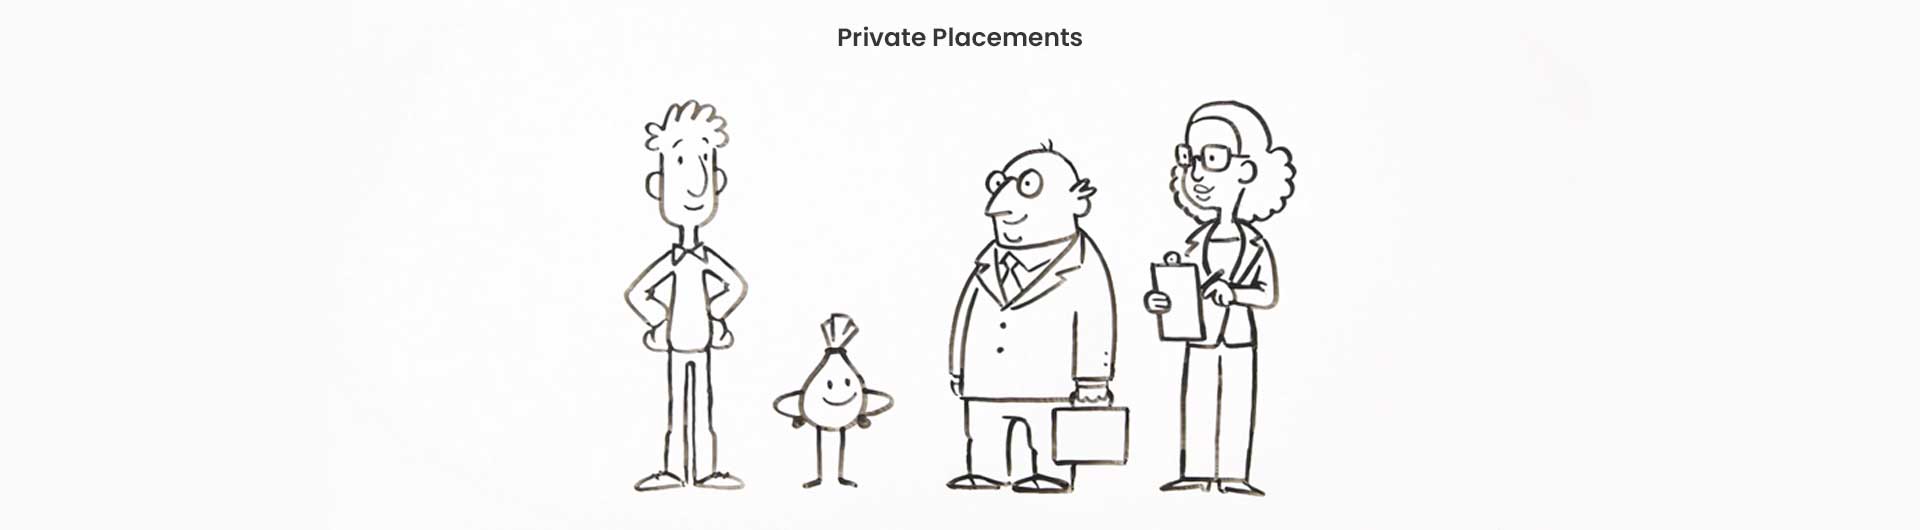 Private Placements Whiteboard